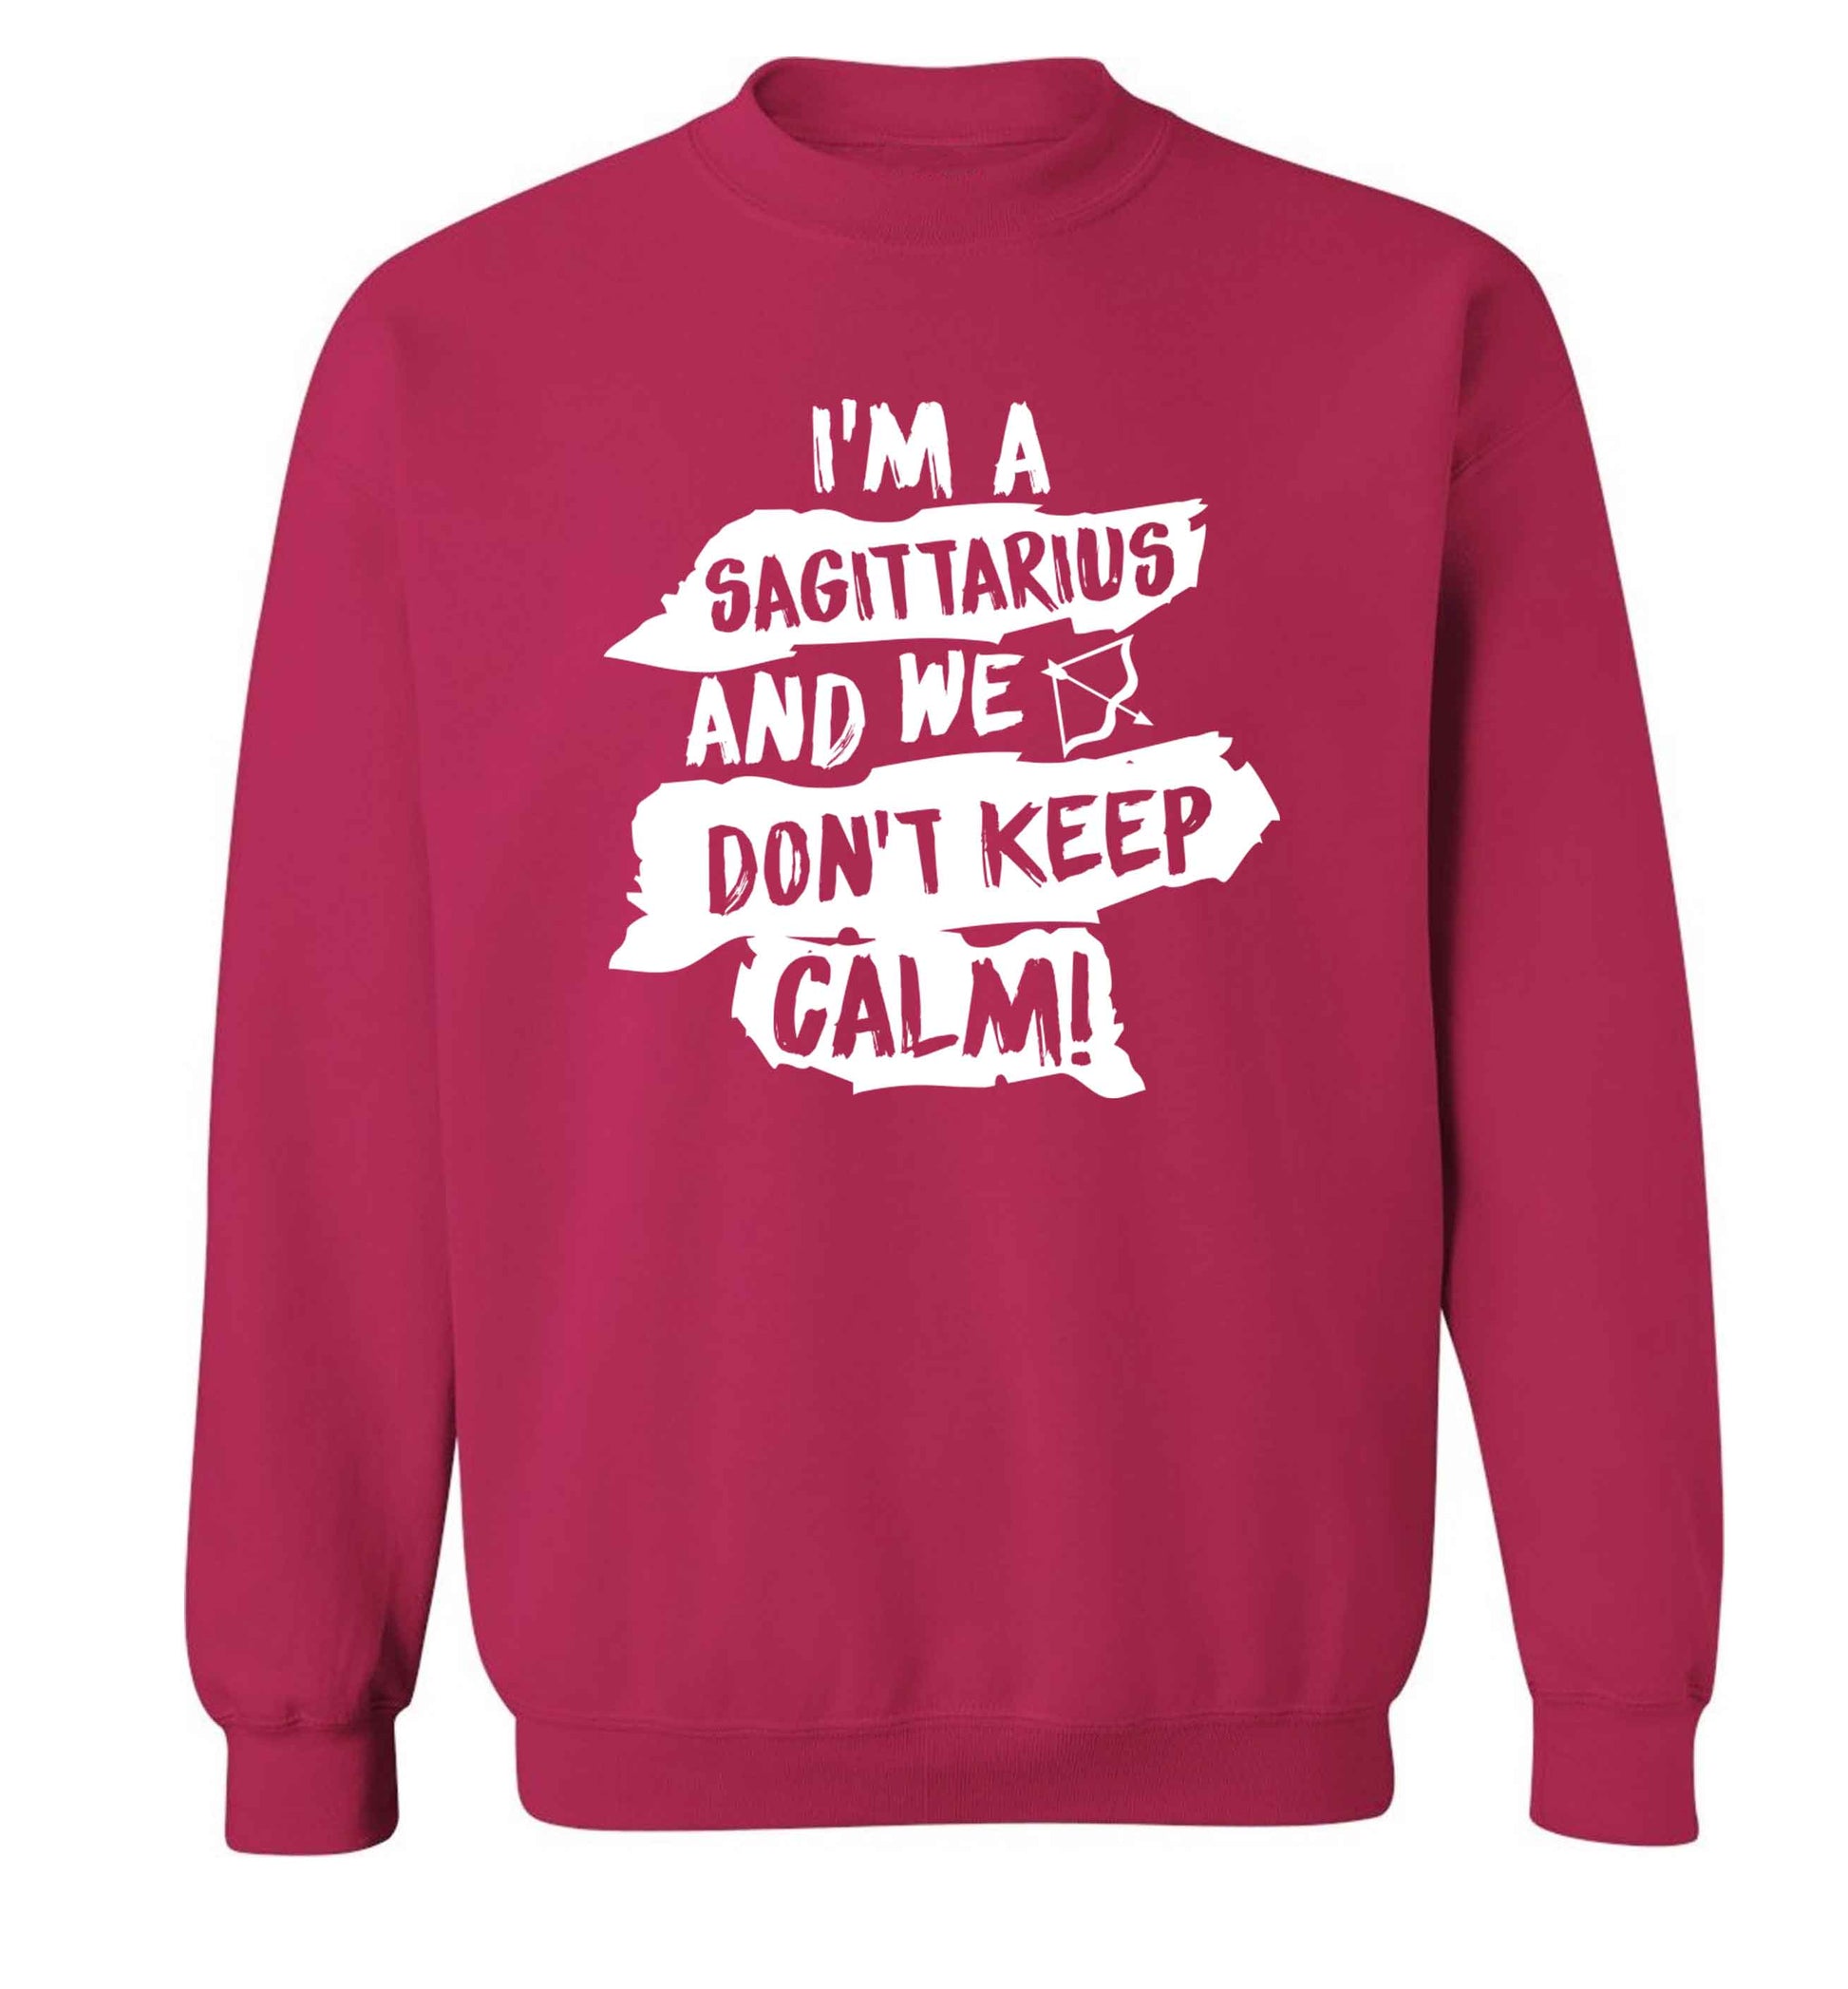 I'm a sagittarius and we don't keep calm Adult's unisex pink Sweater 2XL